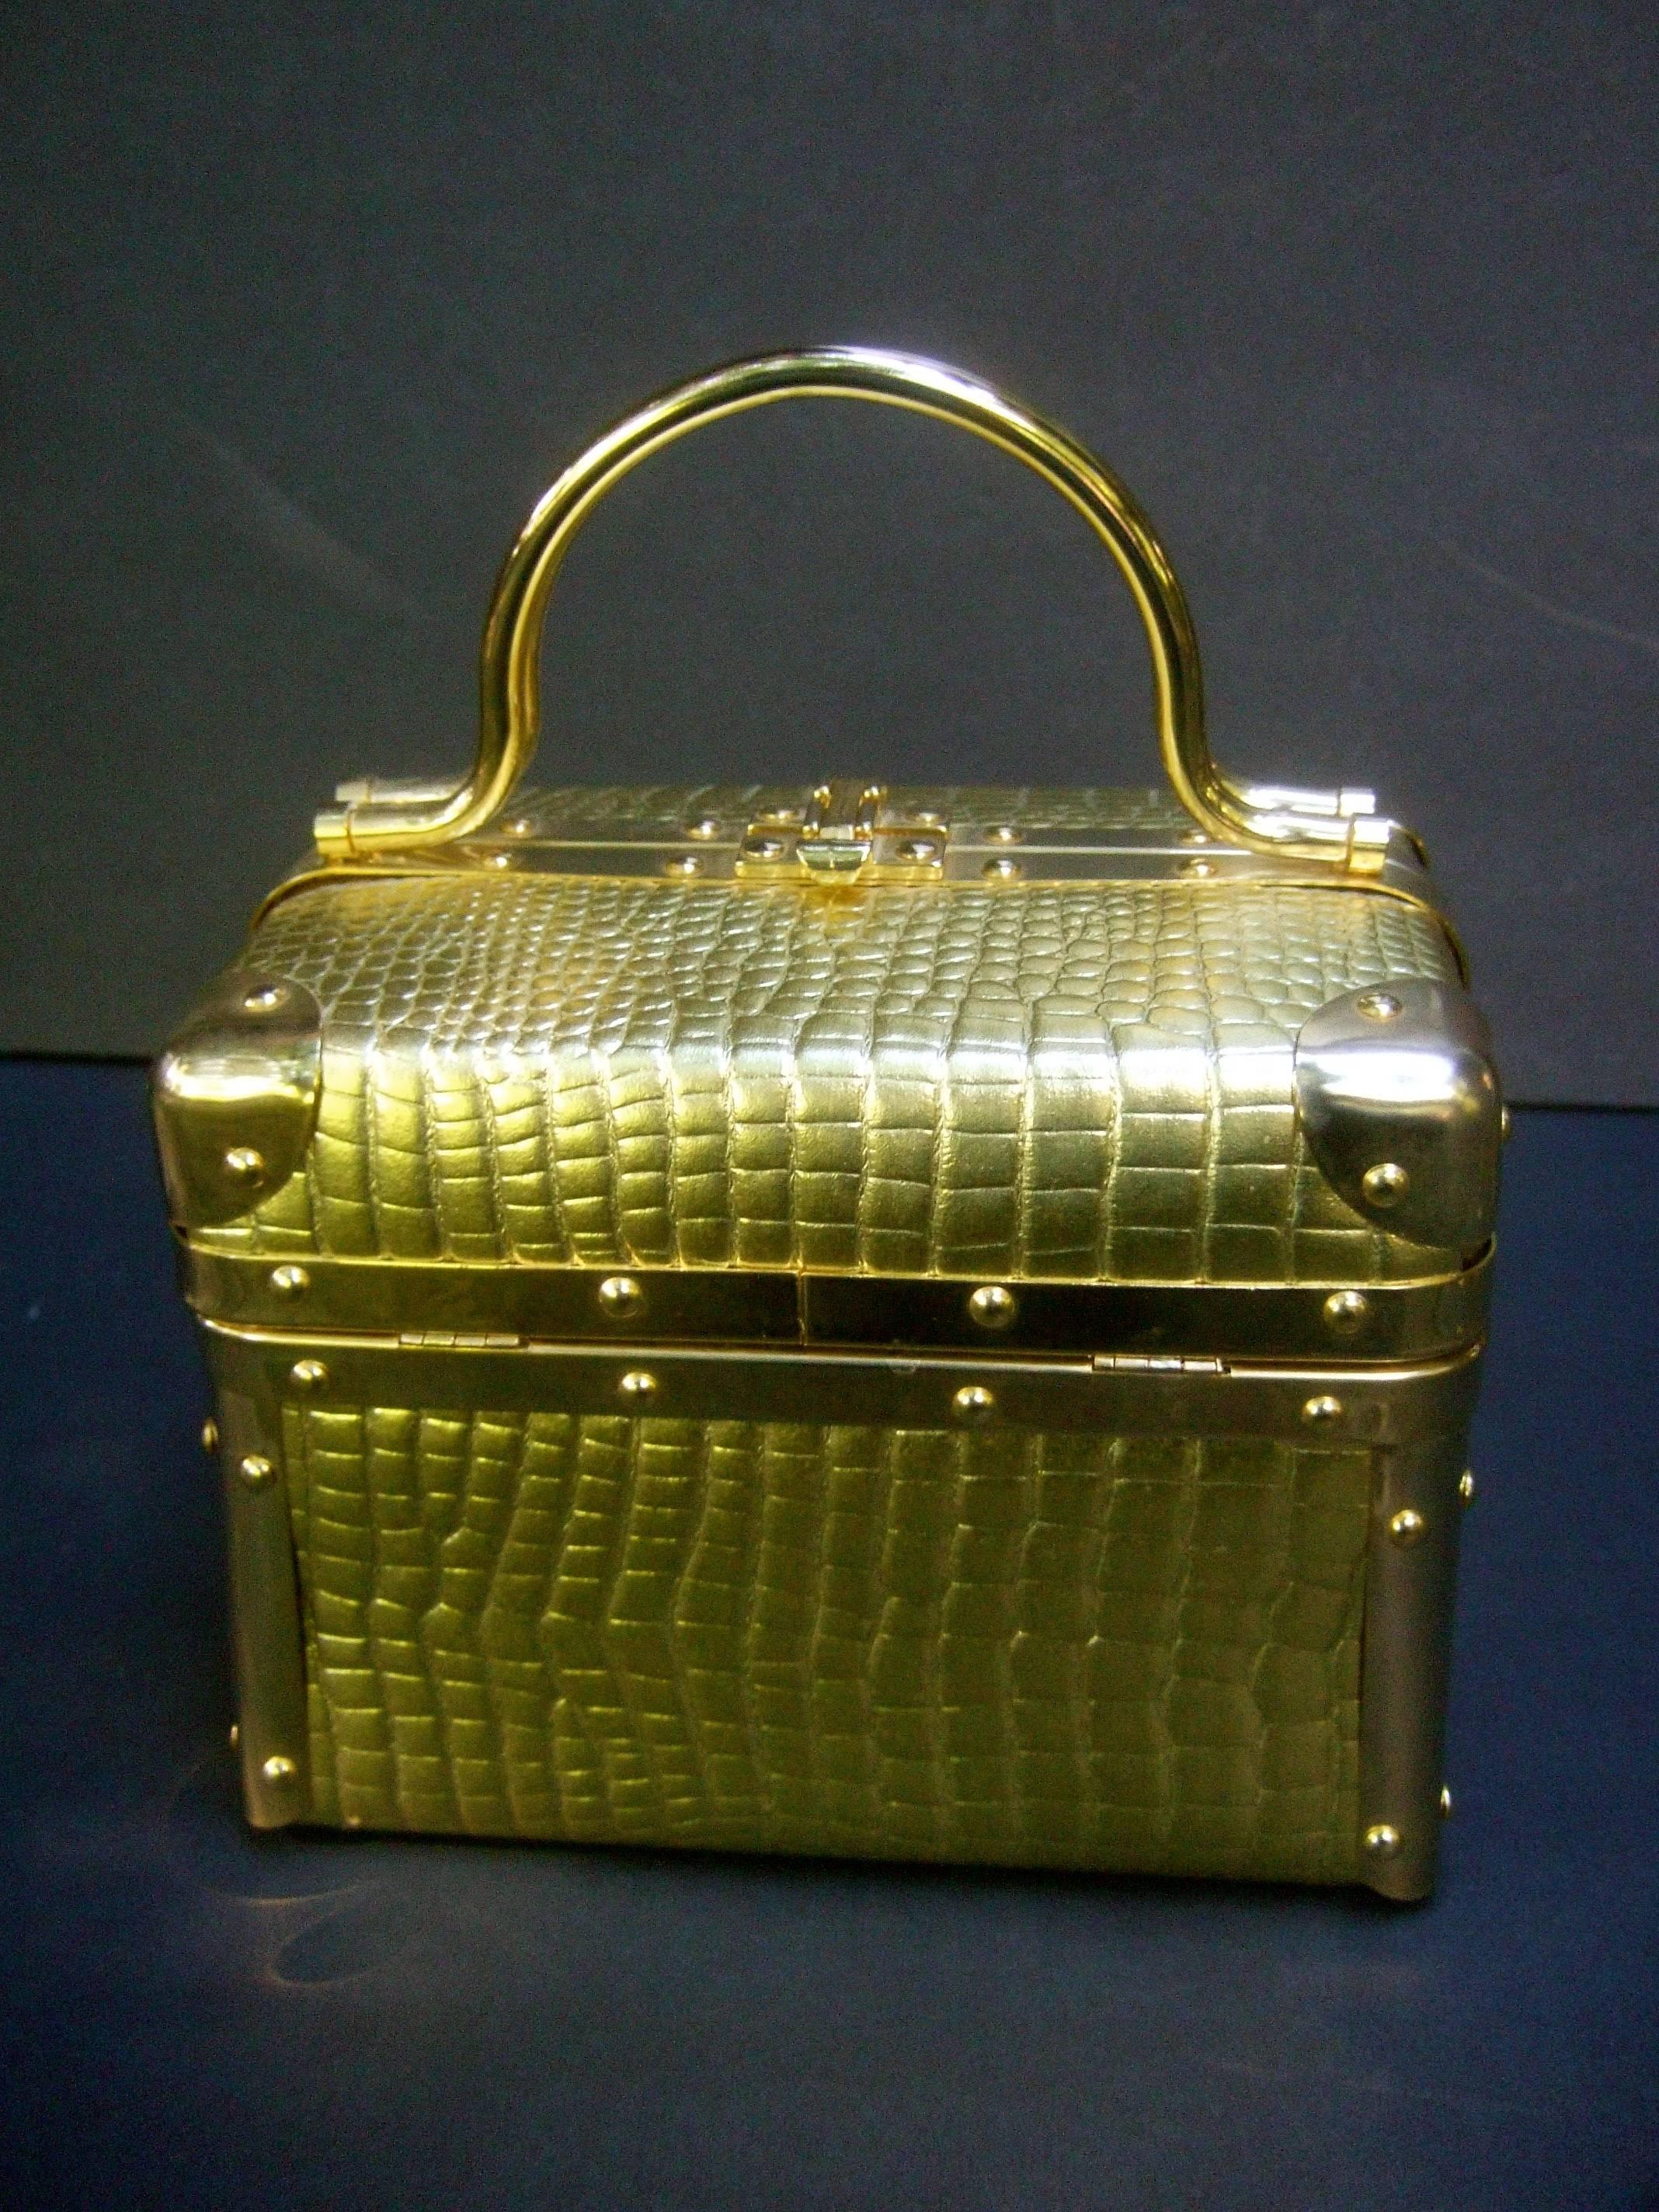 Borsa Bella Italy gold metallic embossed box purse c 1980s
The stylish Italian box purse is covered with luminous
gold embossed vinyl that emulates reptile skin 

Designed with a pair of gilt metal swivel handles 
Framed with sleek gilt metal trim.